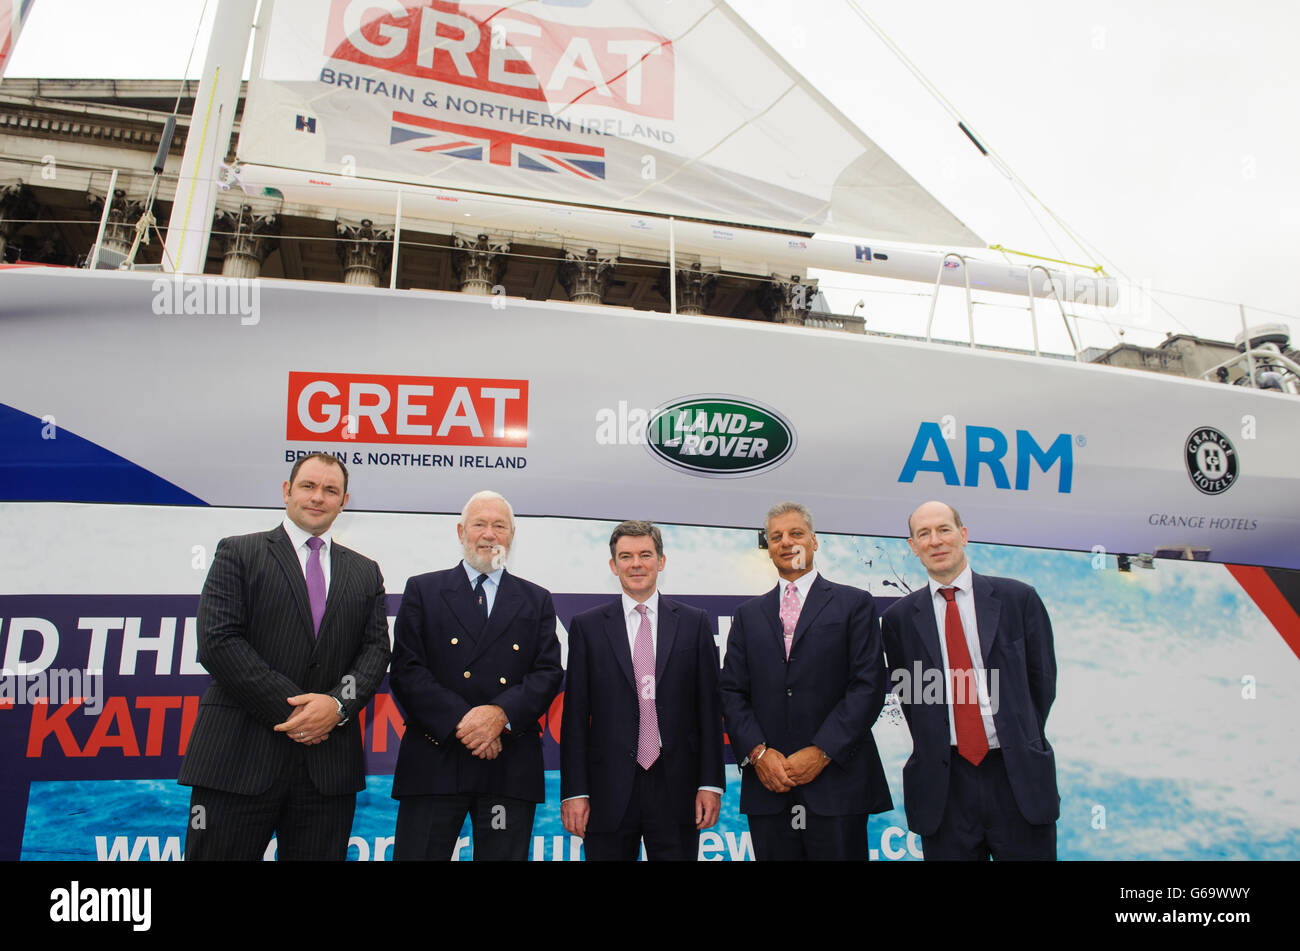 (left to right) Global Sponsorship Manager for Land Rover Ed Tilston, Sir Robin Knox-Johnston, Sports Minister Hugh Robertson, Managing Director of Grange Hotels Tony Matharu and Vice President of Public affairs at ARM Stephen Patttison at a launch event for the yacht 'Great Britain' in Trafalgar Square, London. PRESS ASSOCIATION Photo. 'Great Britain' will be the flagship of the Clipper Round the World Yacht Race, which starts on 1 September 2013. Picture date: Wednesday July 31, 2013. Photo credit should read: Dominic Lipinski/PA Wire Stock Photo